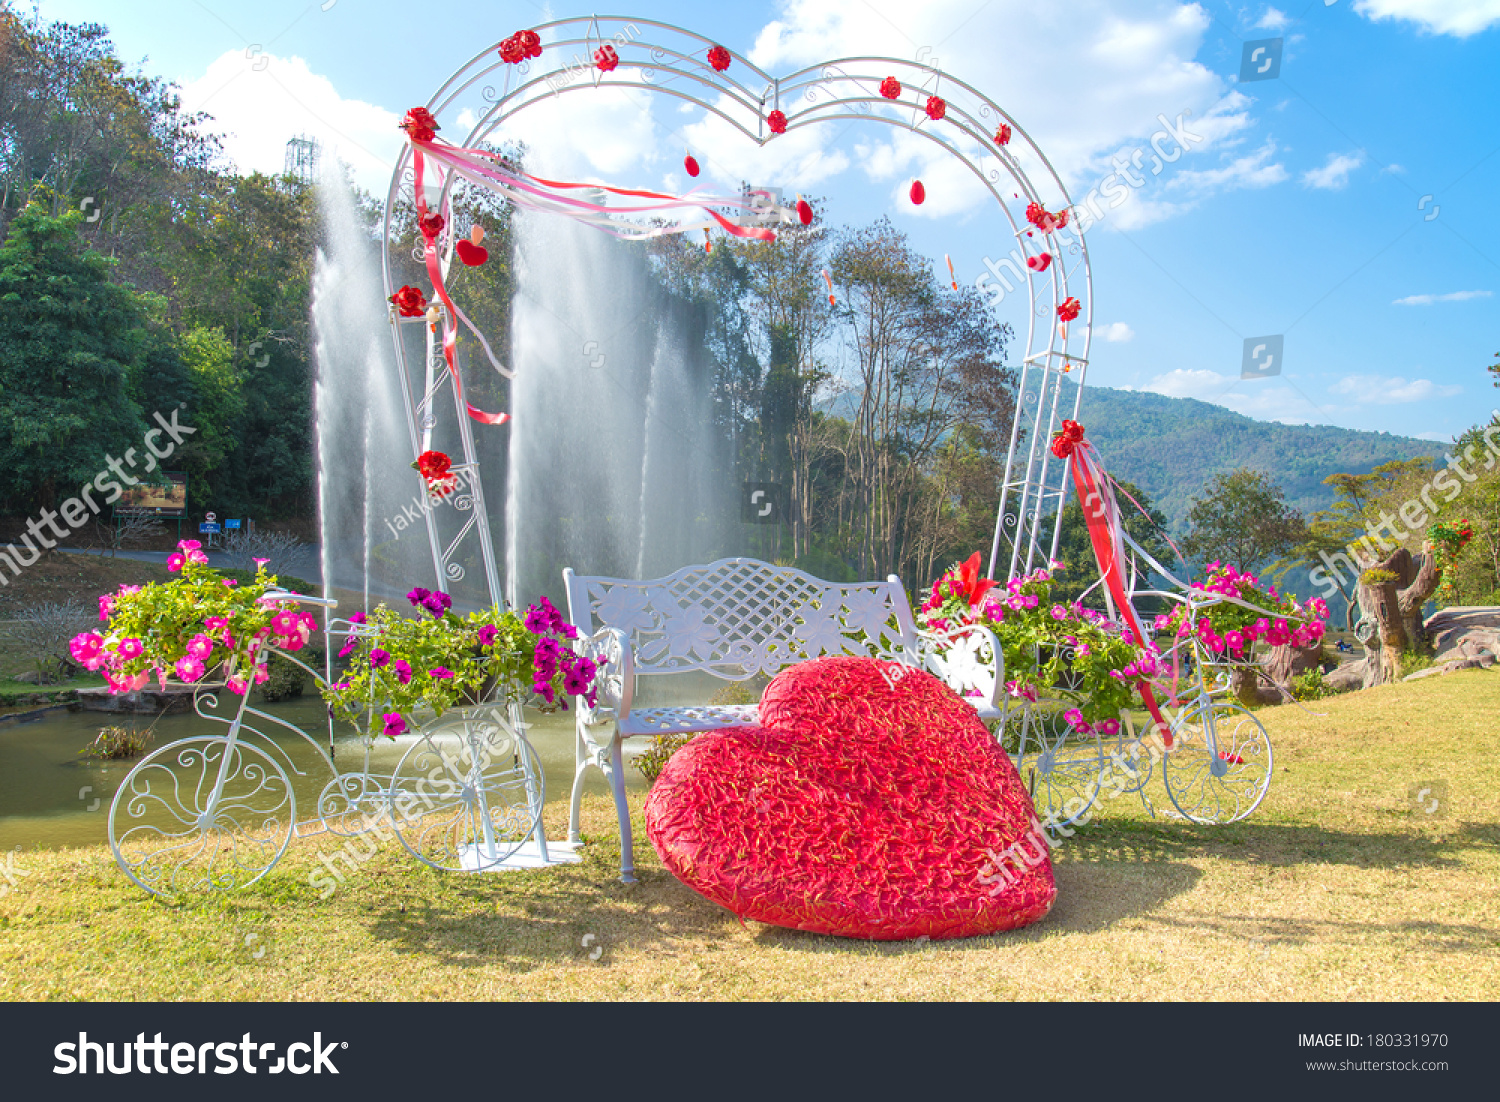 Beautiful Flower On Bicycle Concept Wedding Stock Photo Edit Now